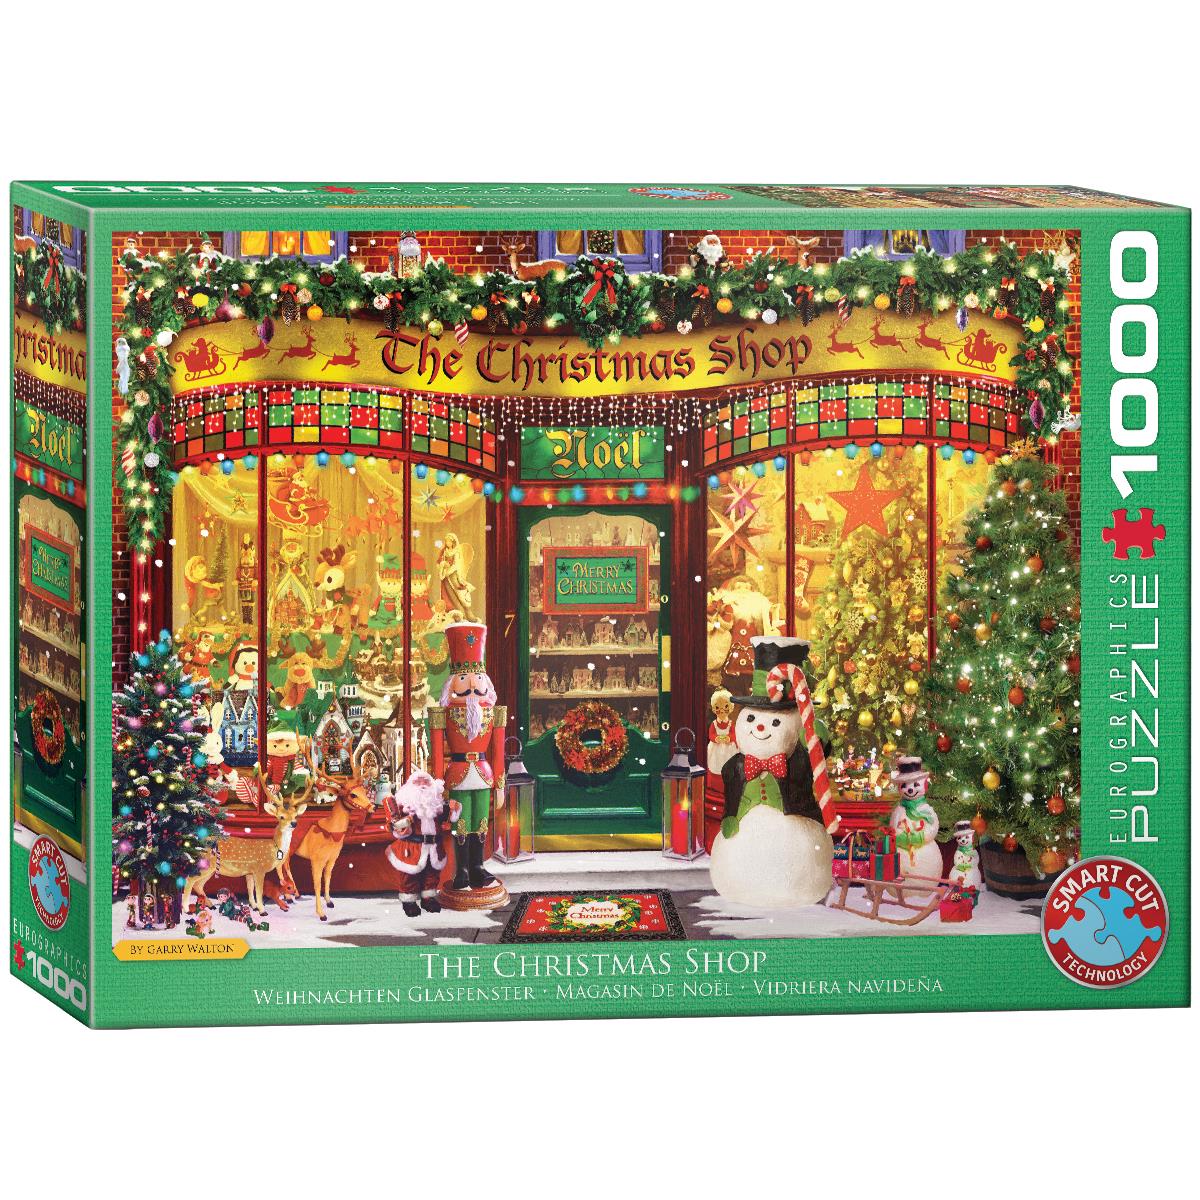 The Christmas Shop by Gerry Walton 1000 Piece Jigsaw Puzzle